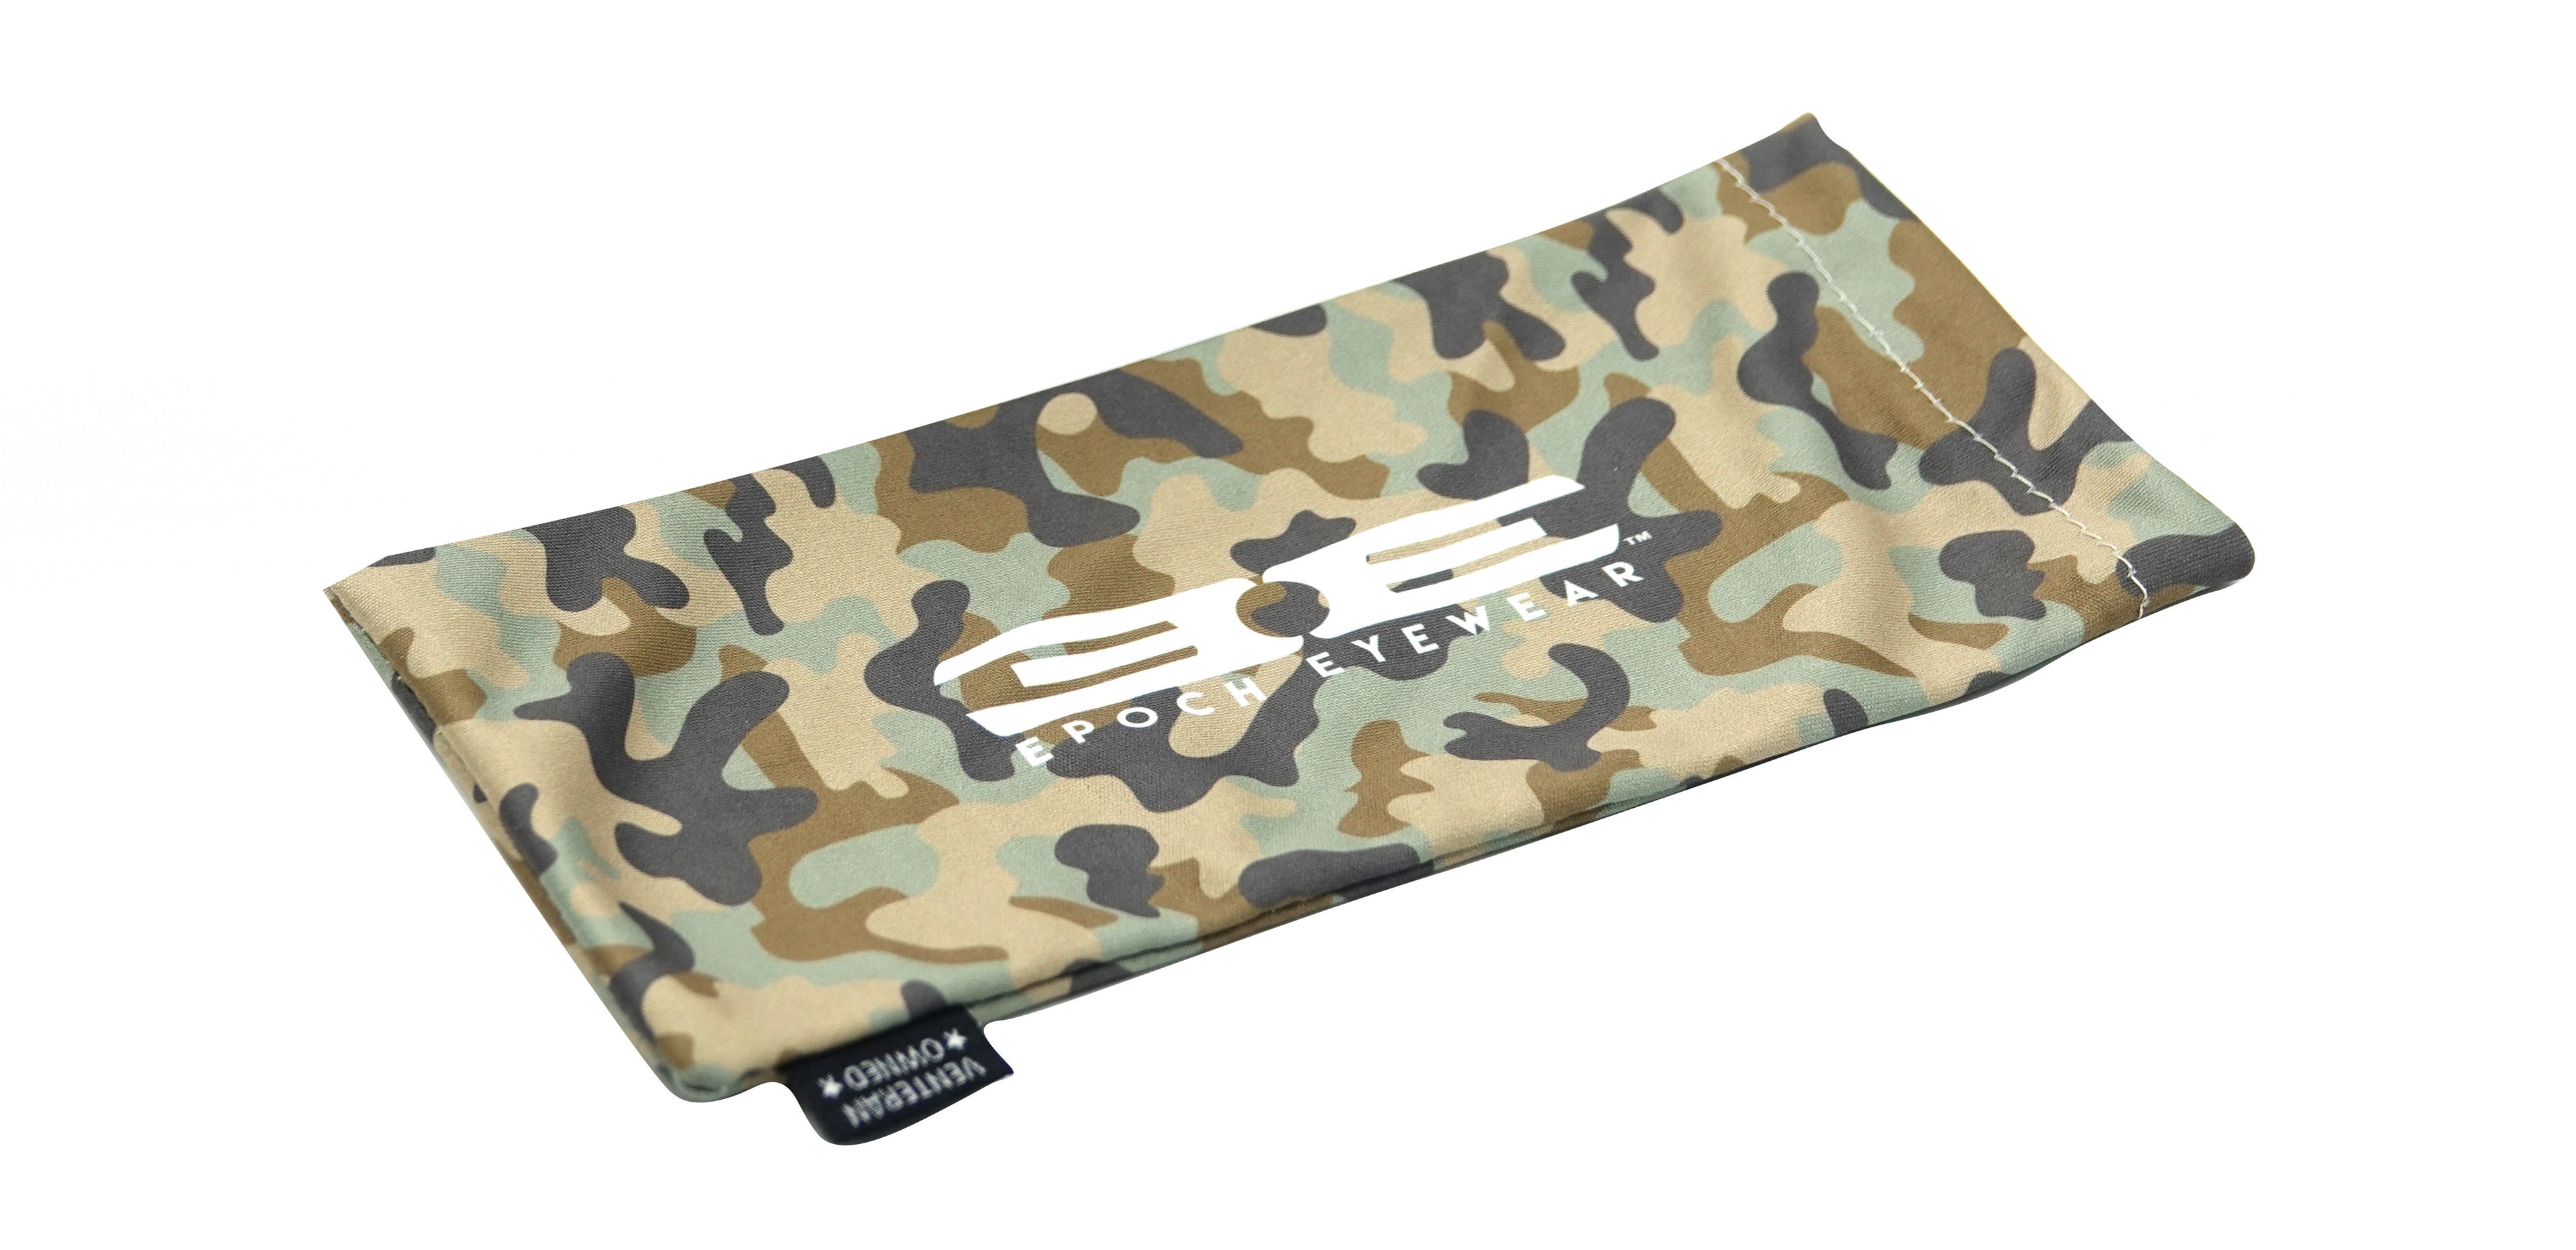 A camouflage Microfiber Bag with a white logo on it.